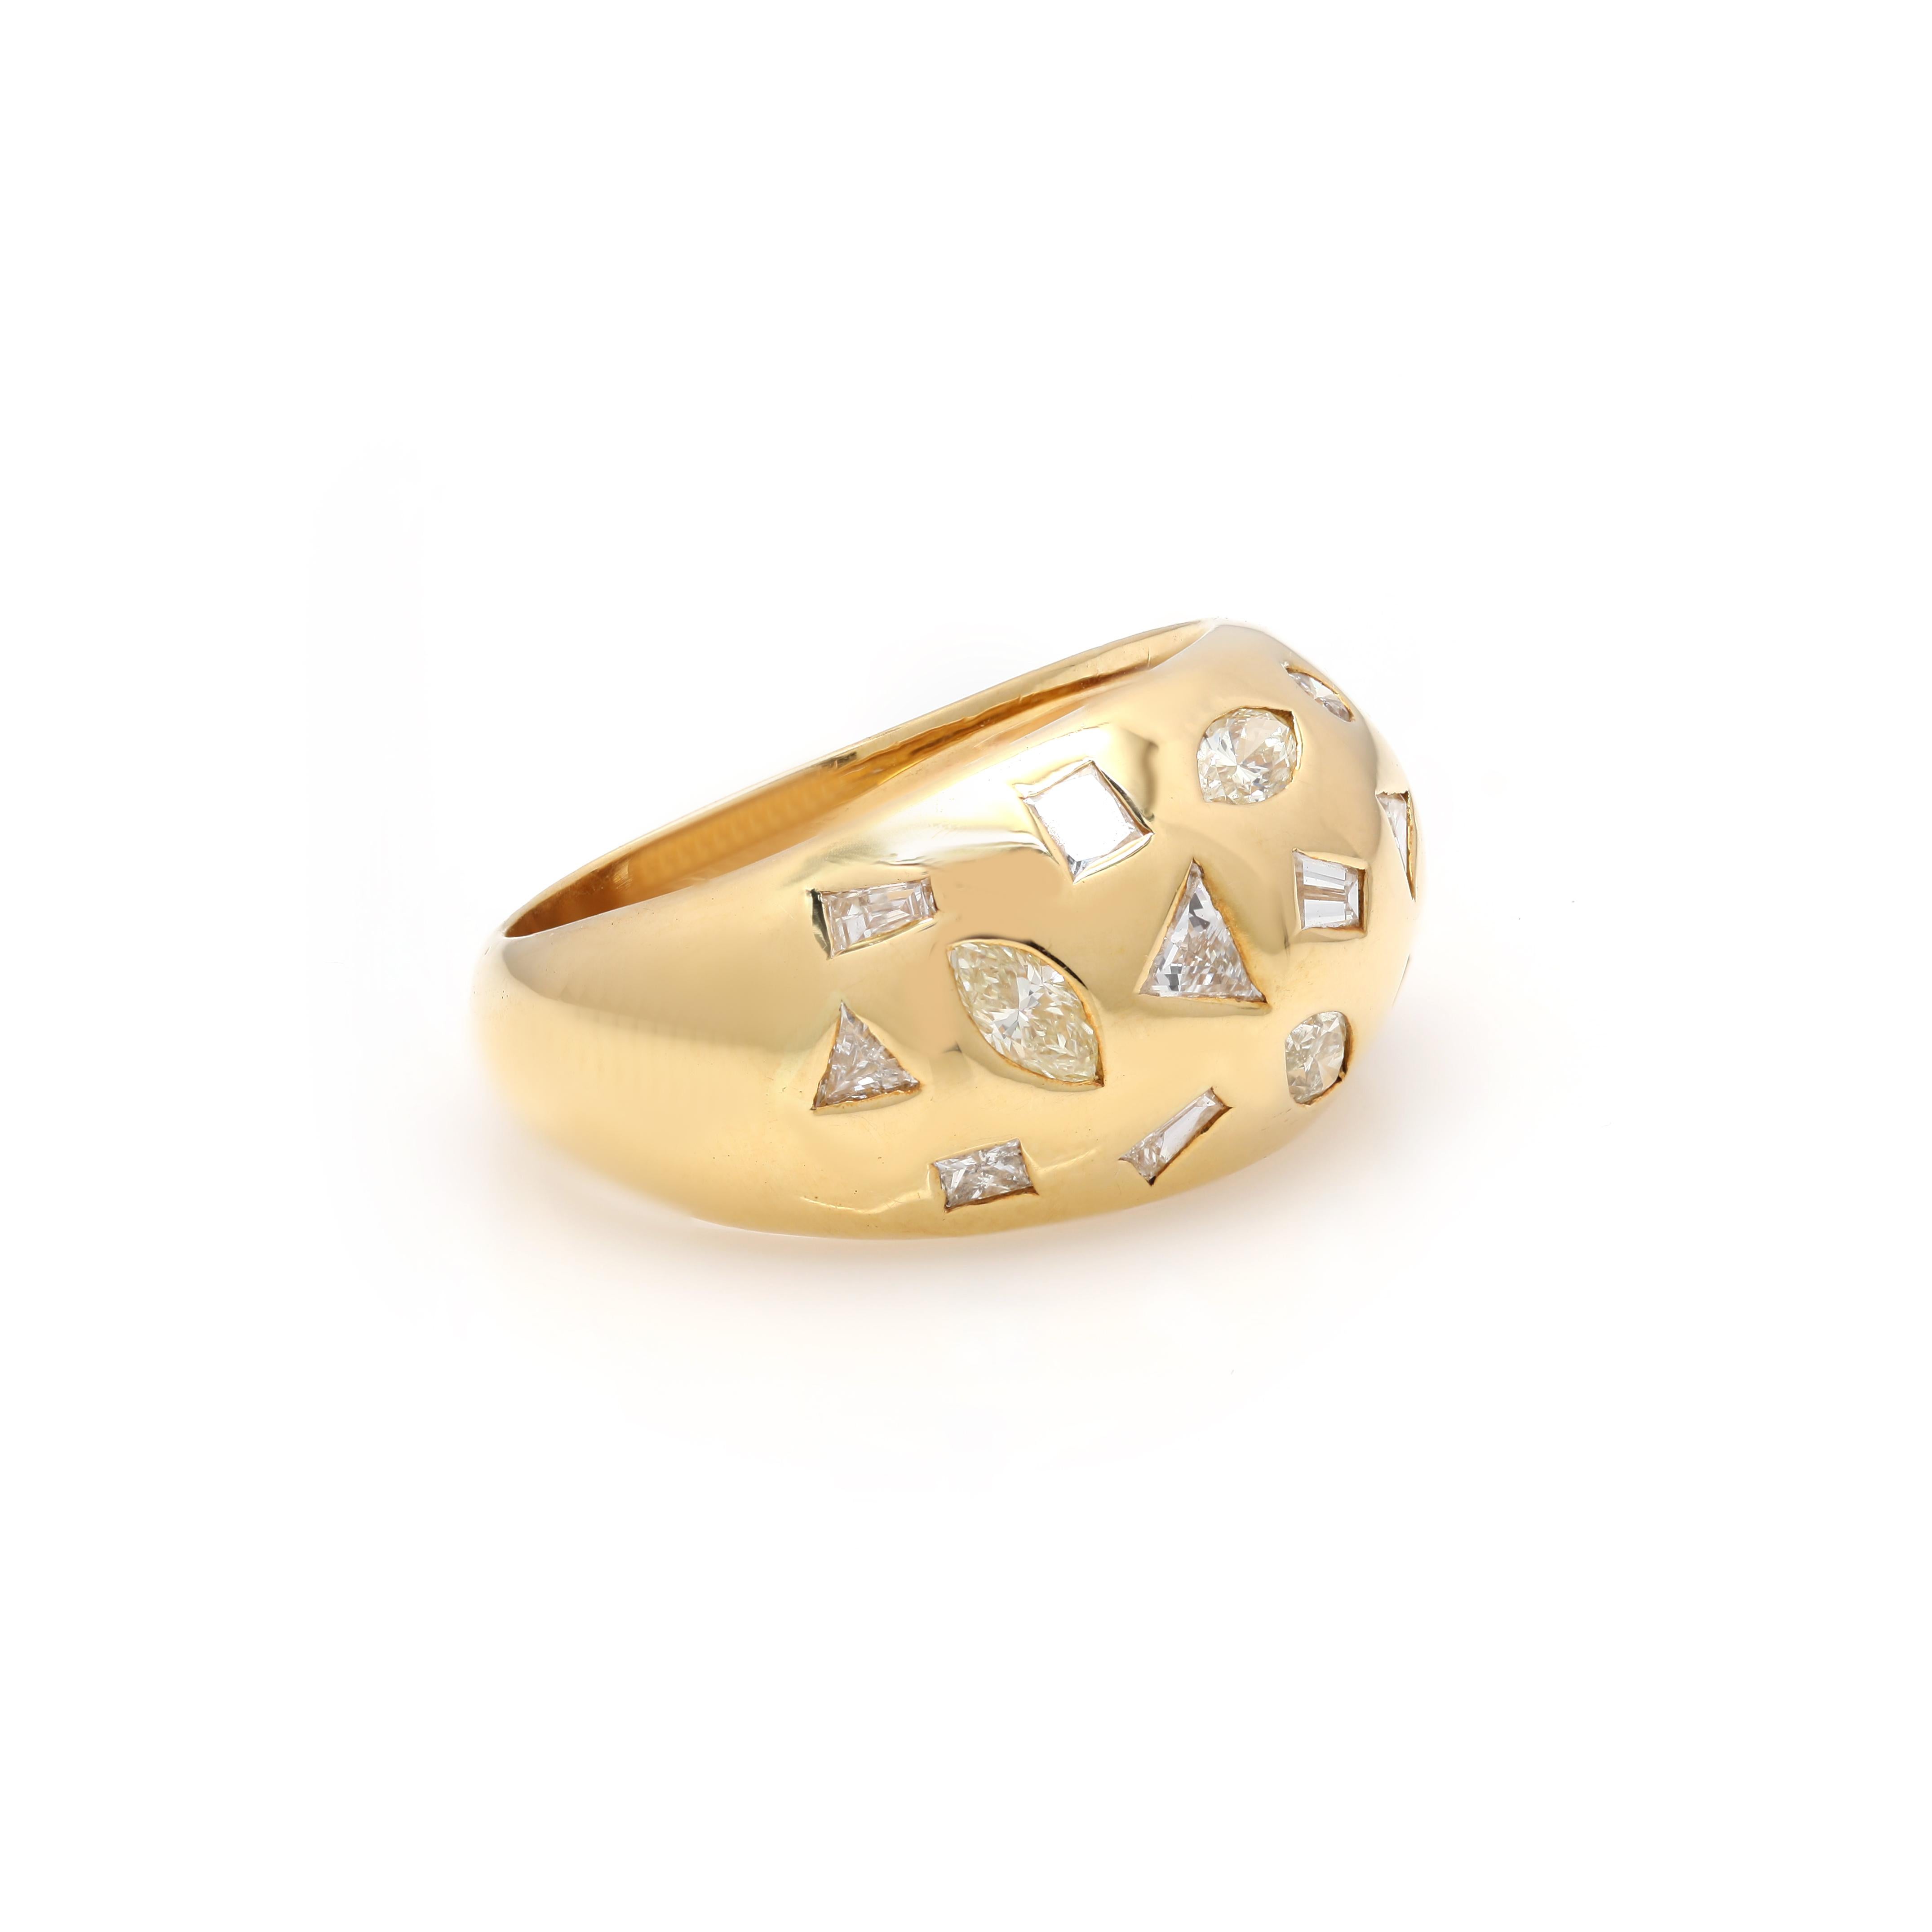 For Sale:  Genuine Diamond Celestial Dome Ring in Solid 18K Yellow Gold for Him 2